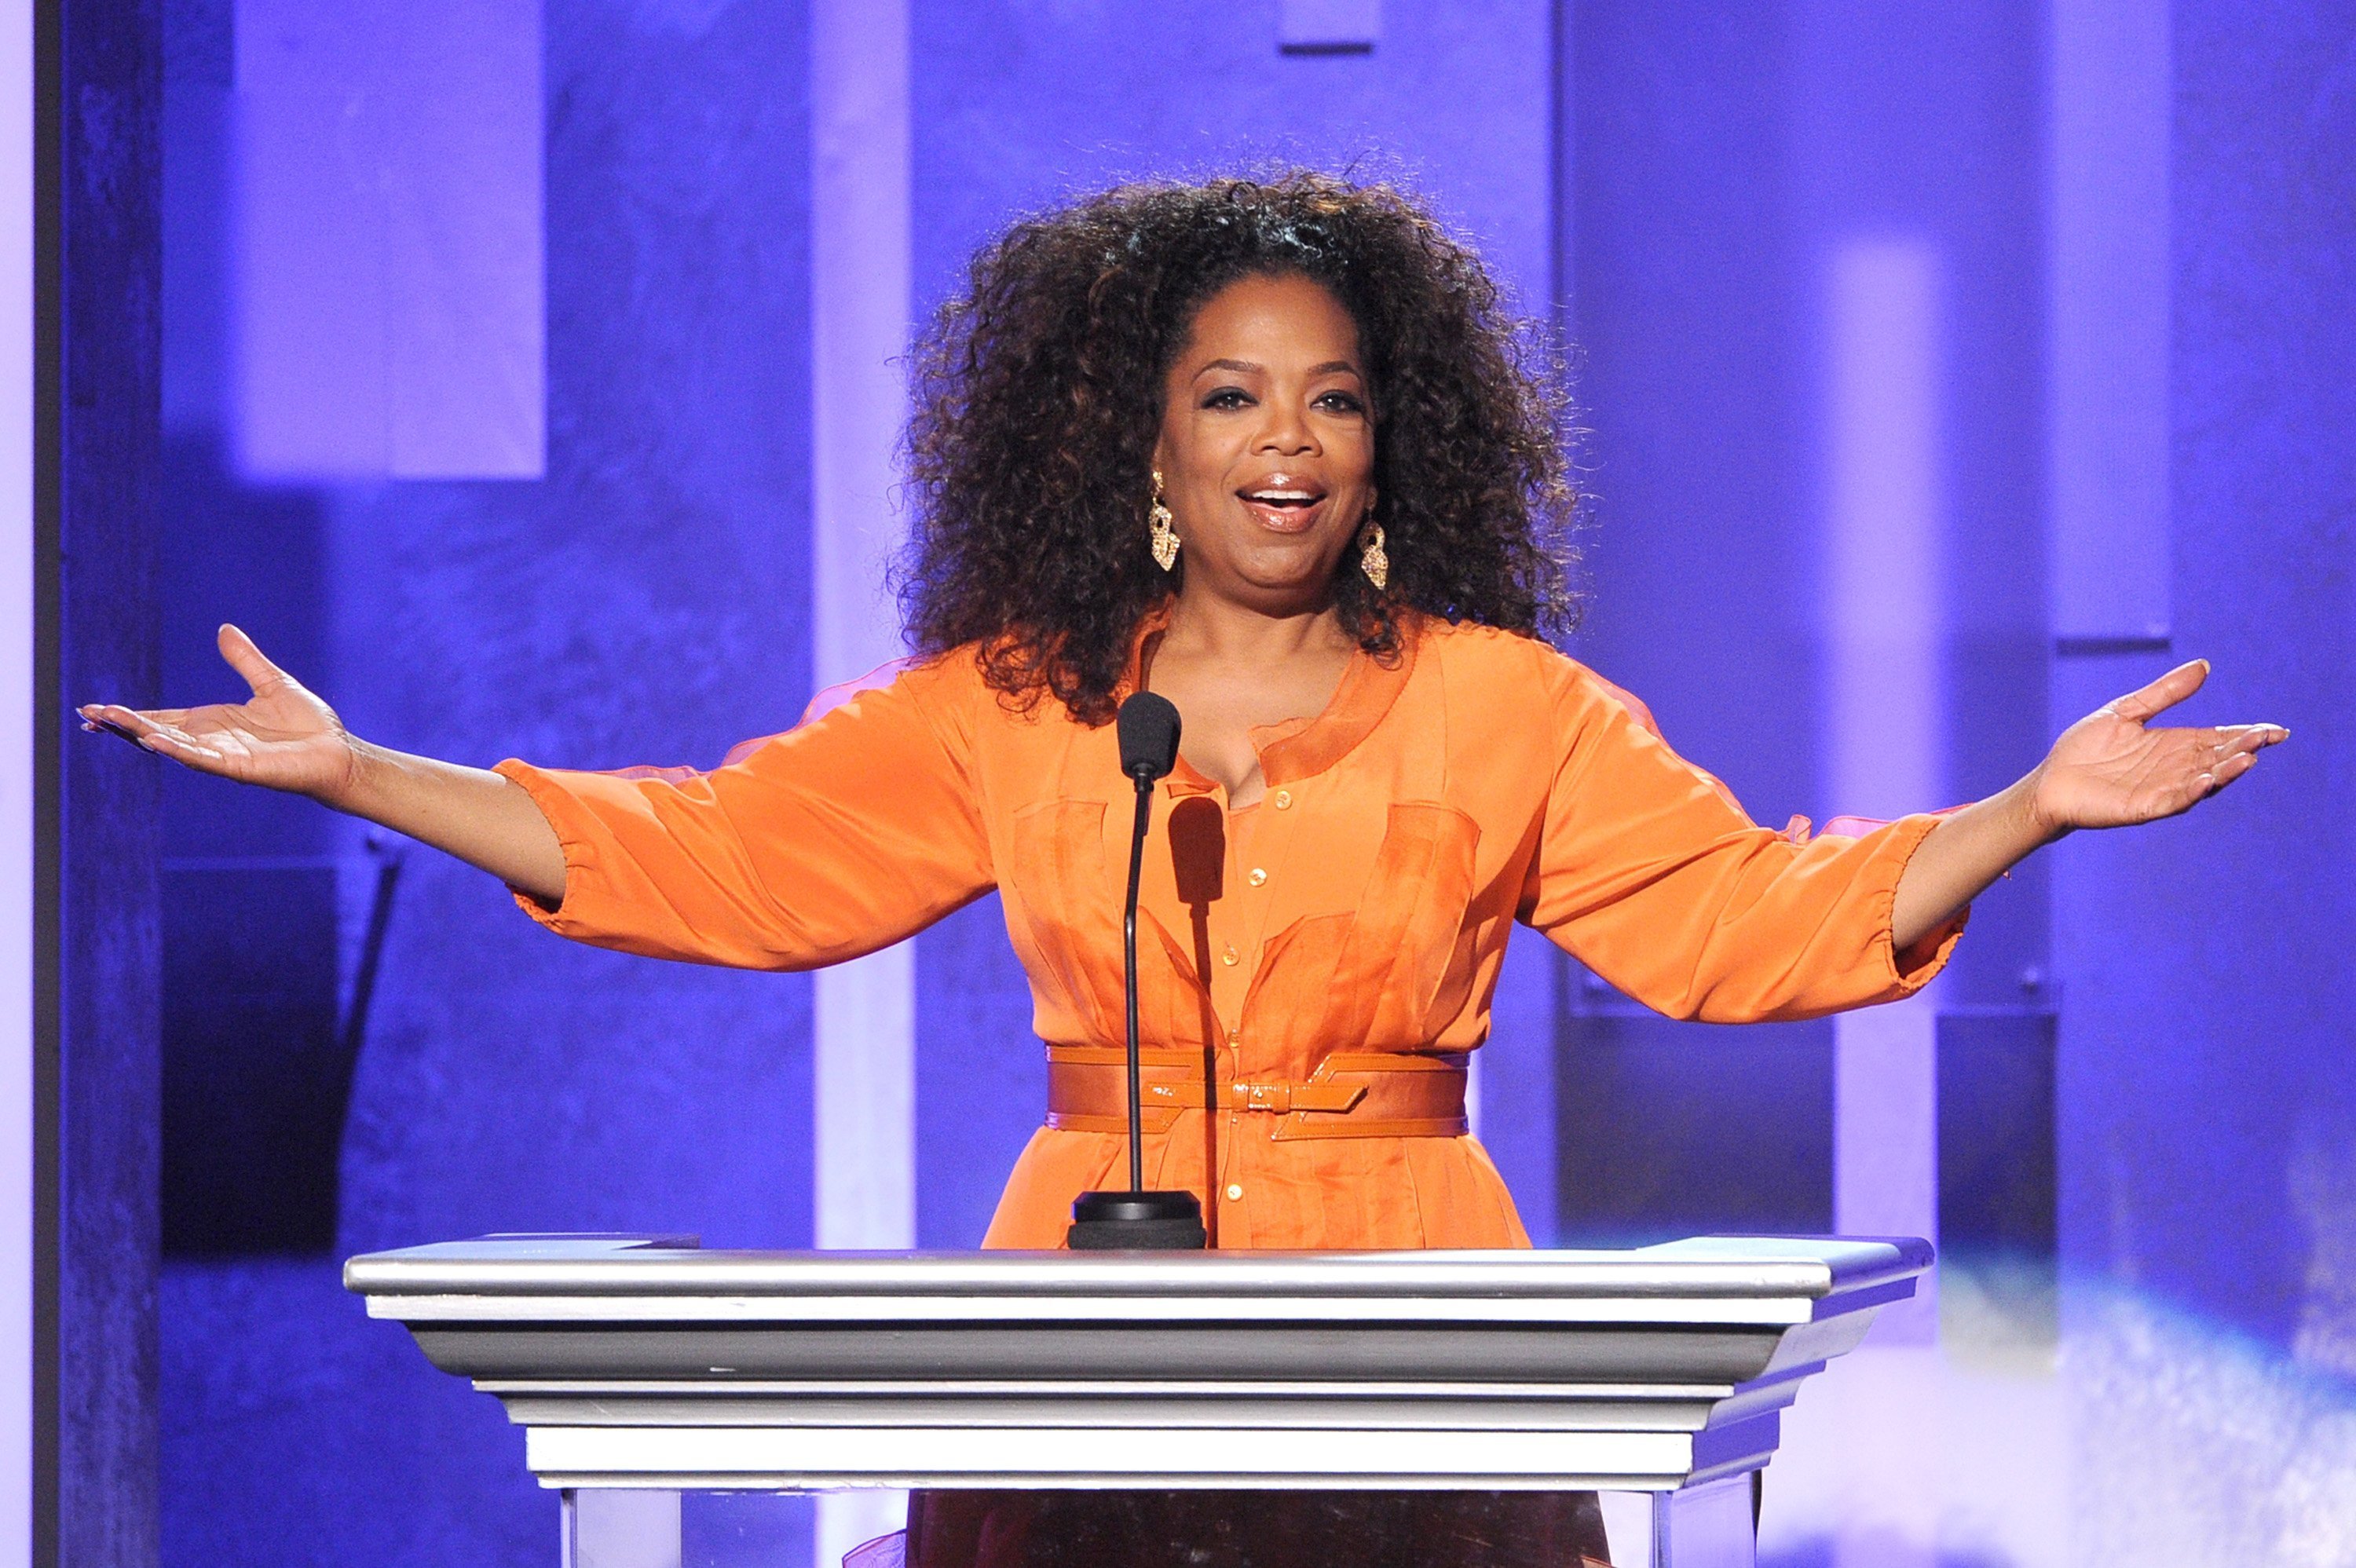 Oprah Winfrey speaks onstage during the 45th NAACP Image Awards presented by TV One at Pasadena Civic Auditorium on February 22, 2014. | Photo: Getty Images